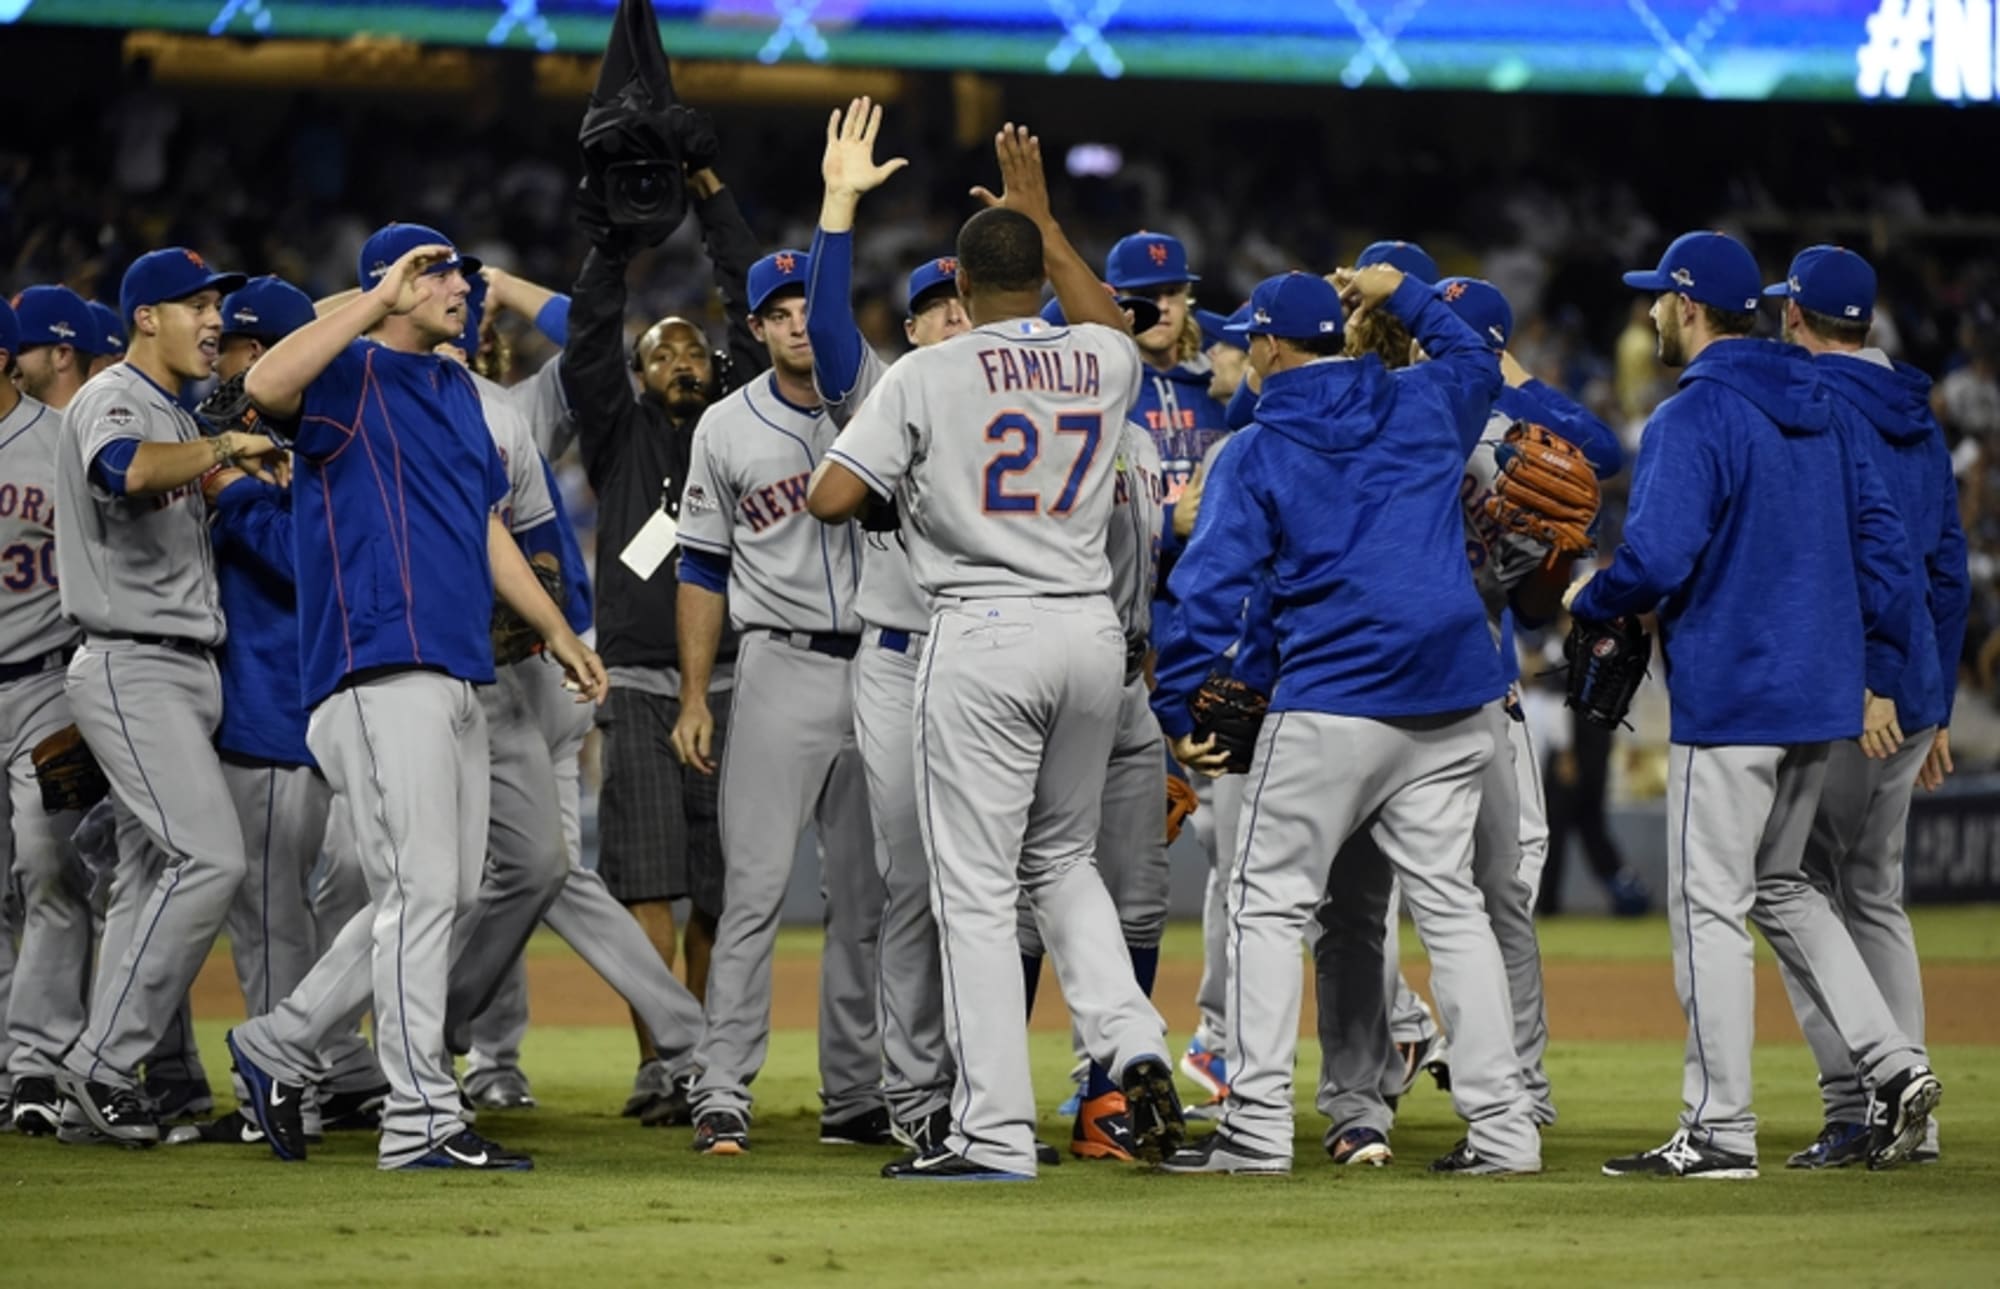 Twitter reaction to Mets defeating Dodgers